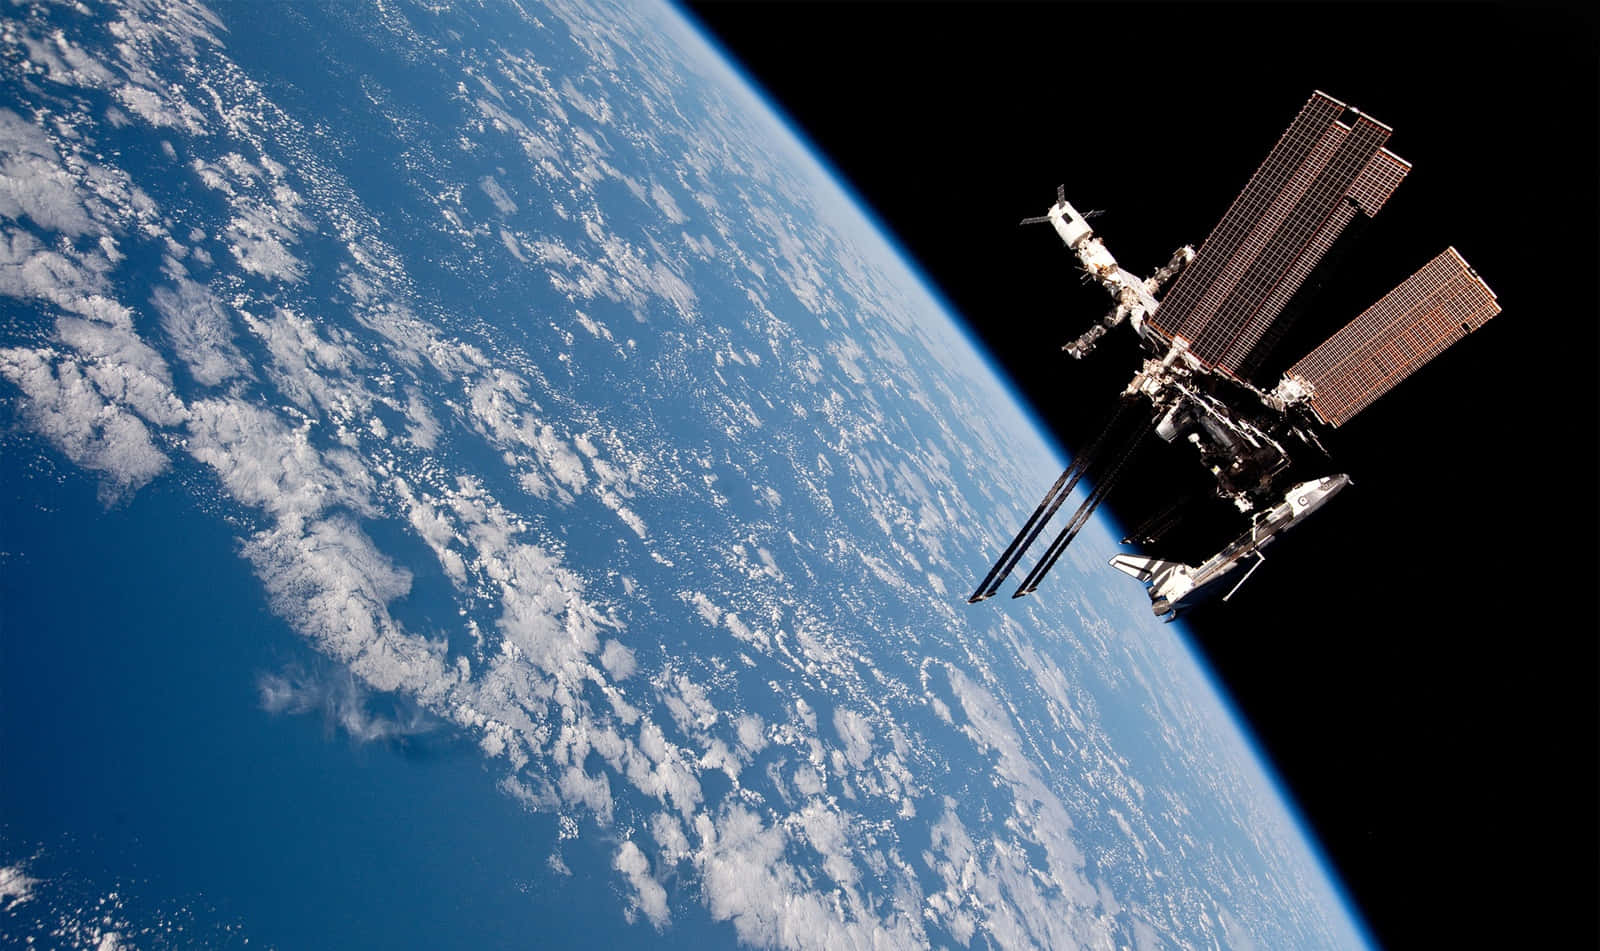 A breathtaking view of the International Space Station (ISS) orbiting above Earth Wallpaper